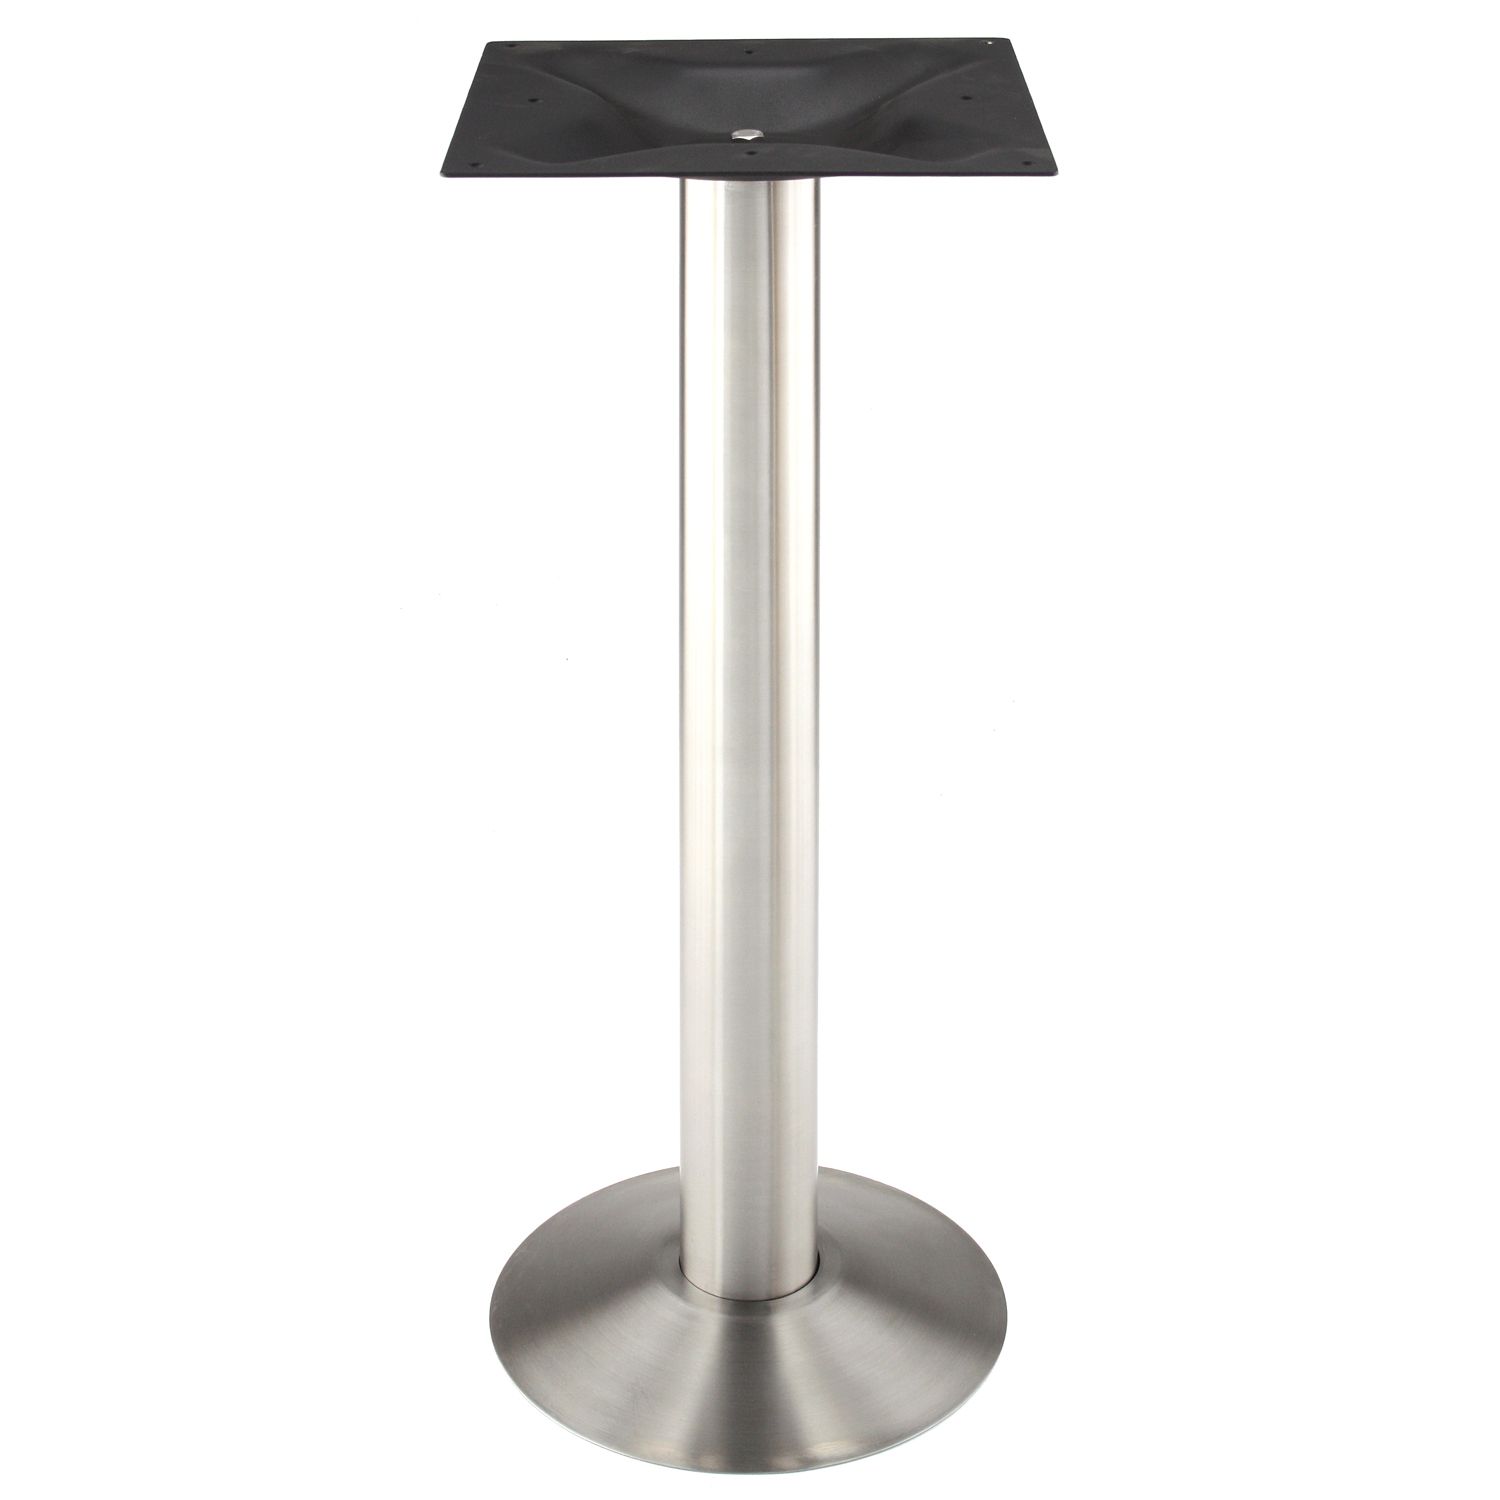 Roswell Bolt Down Stainless Steel Table Base